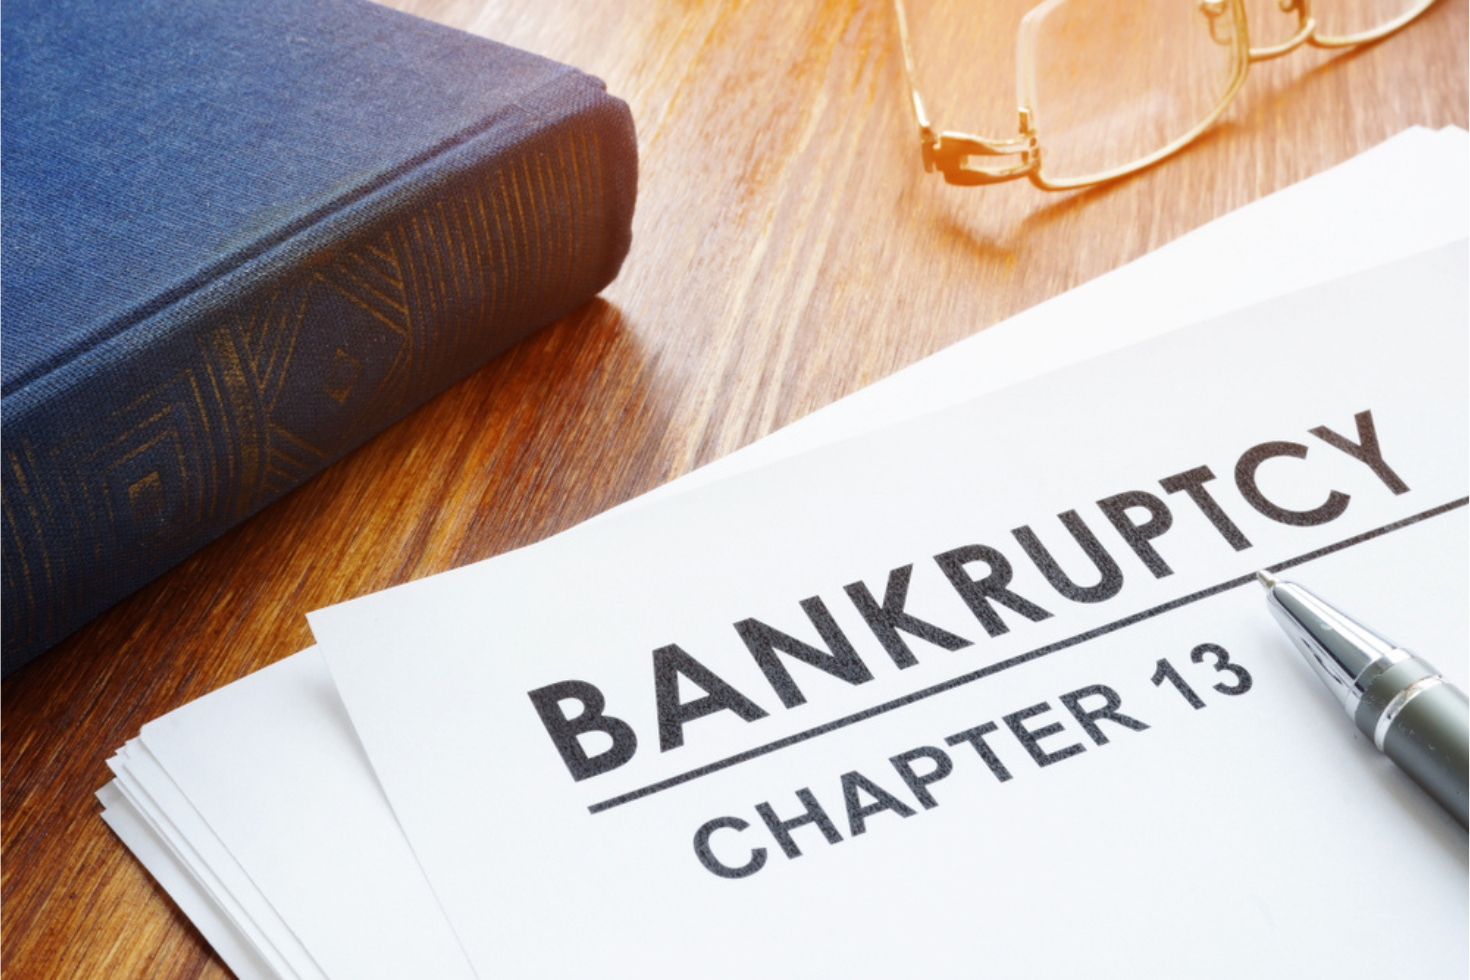 How to Find Apartments That Accept Bankruptcies